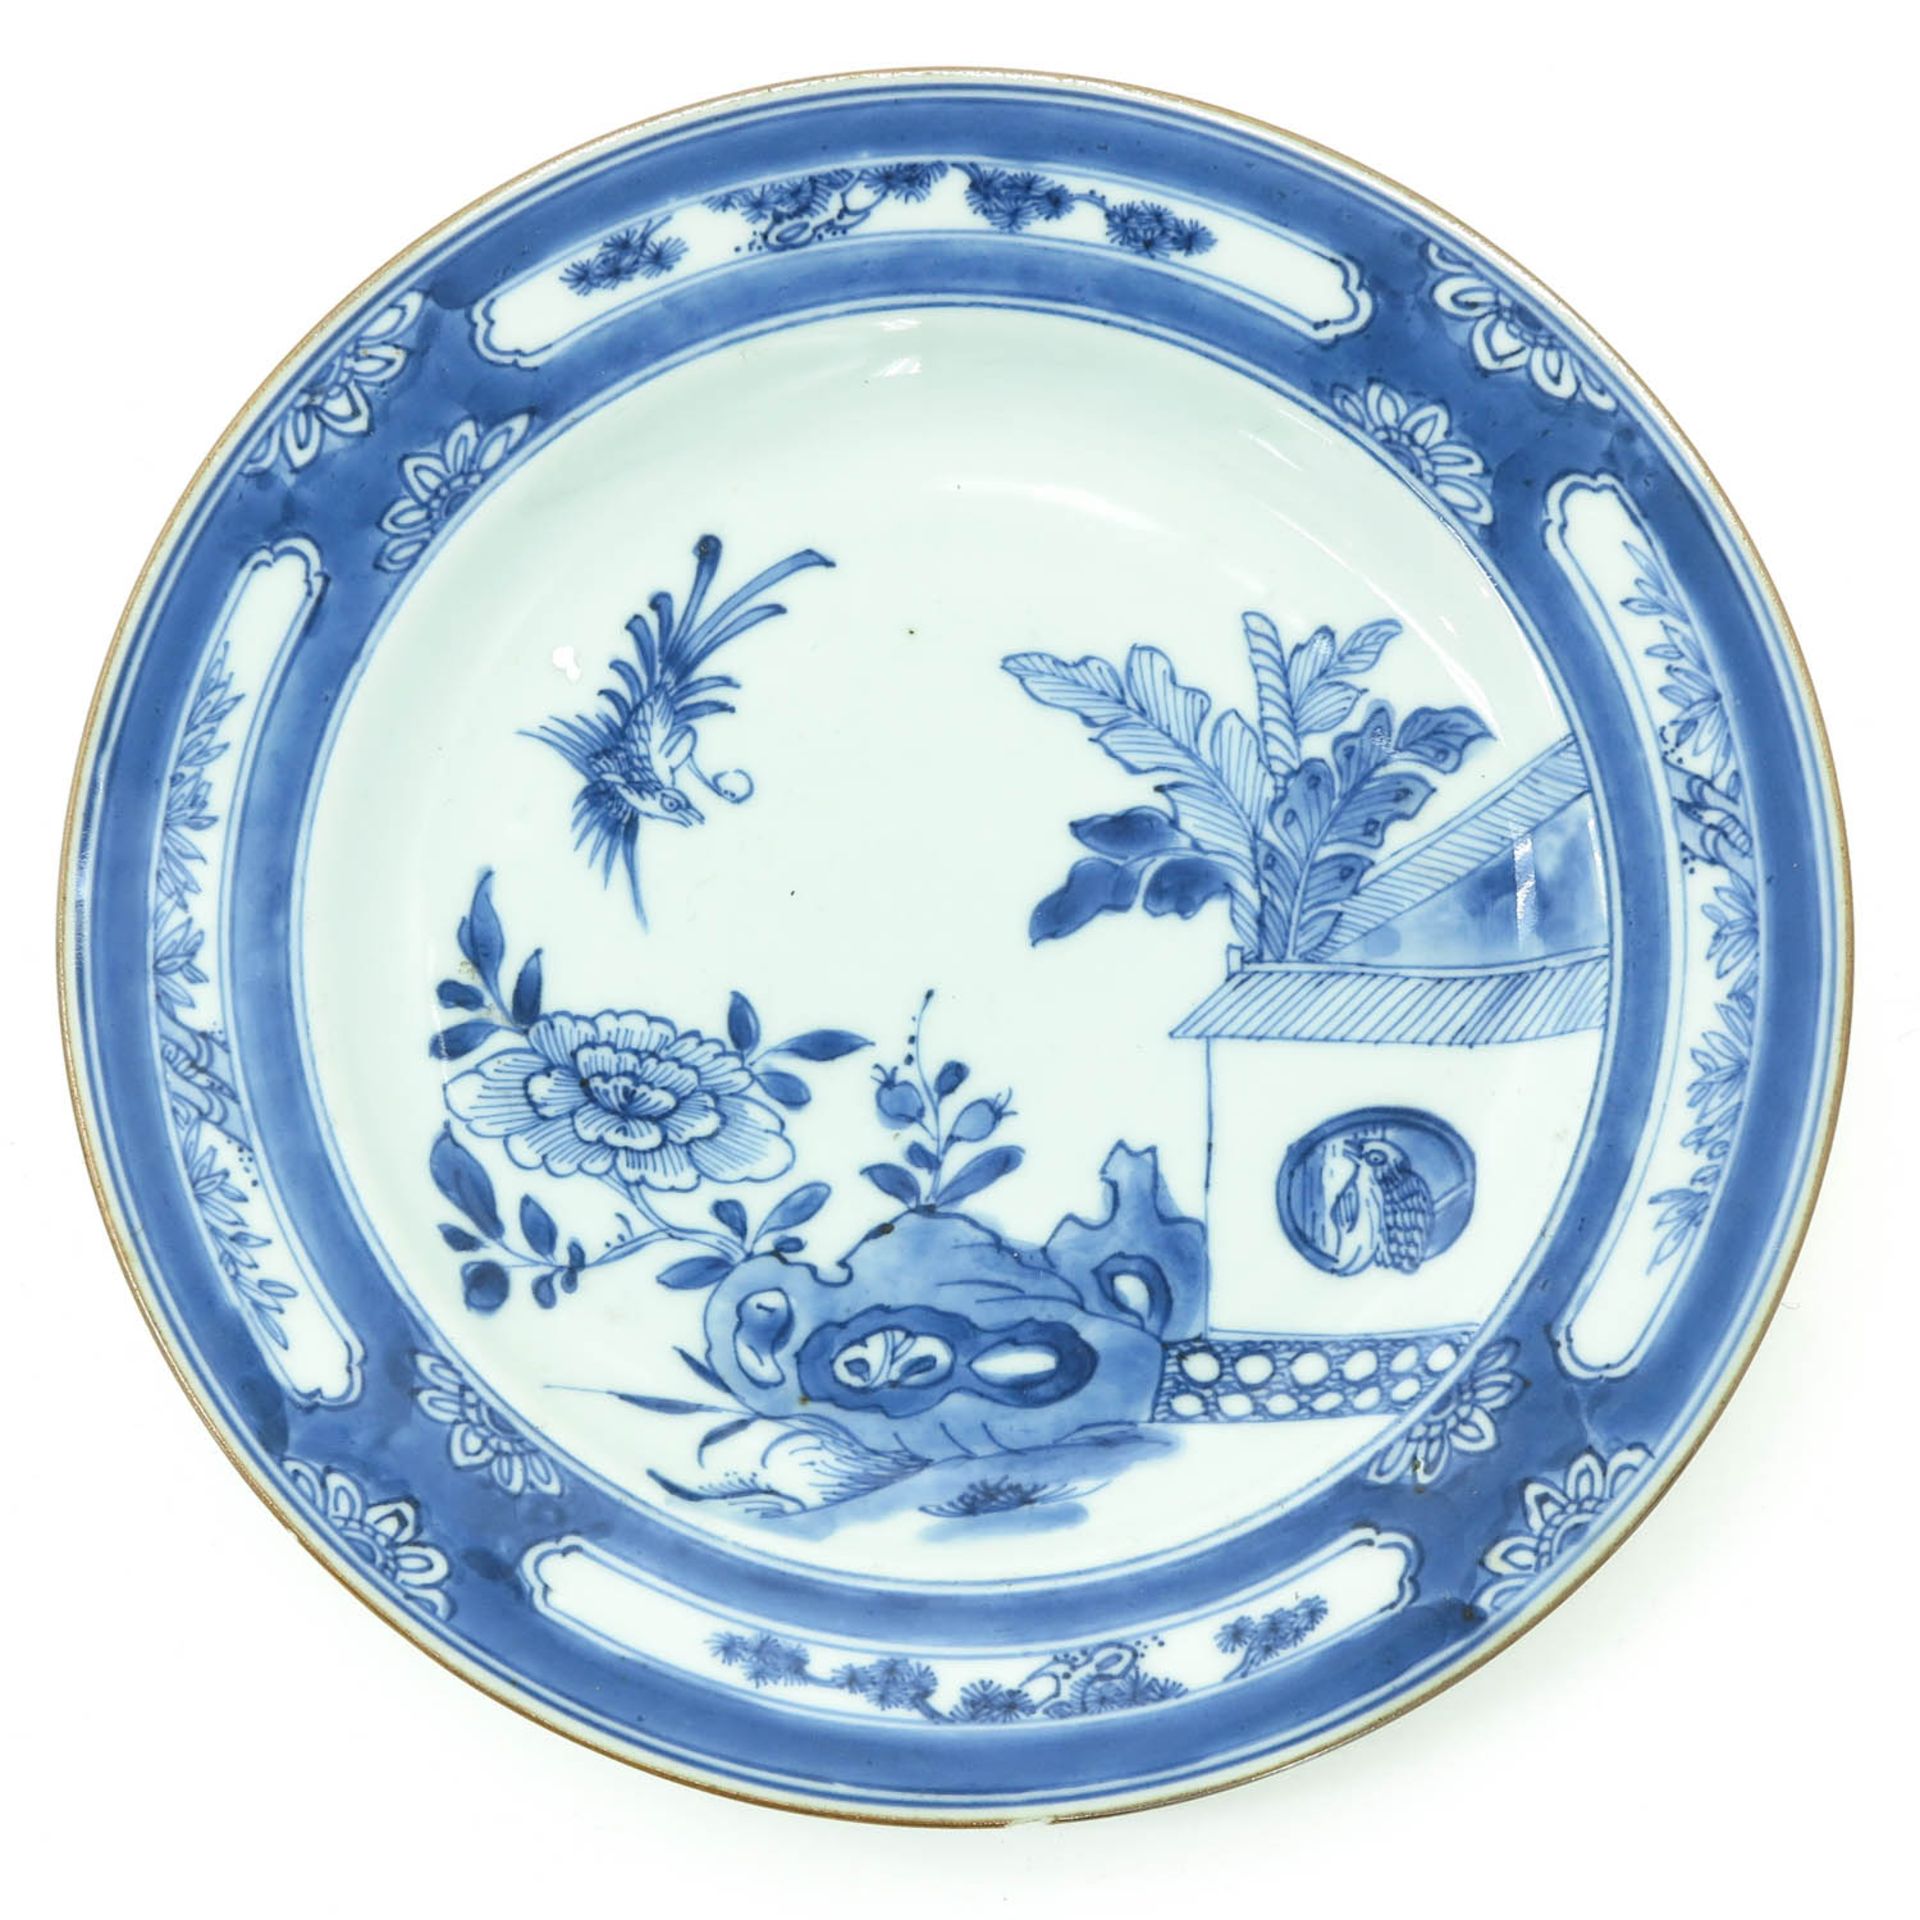 A Series of 6 Blue and White Plates - Bild 9 aus 9